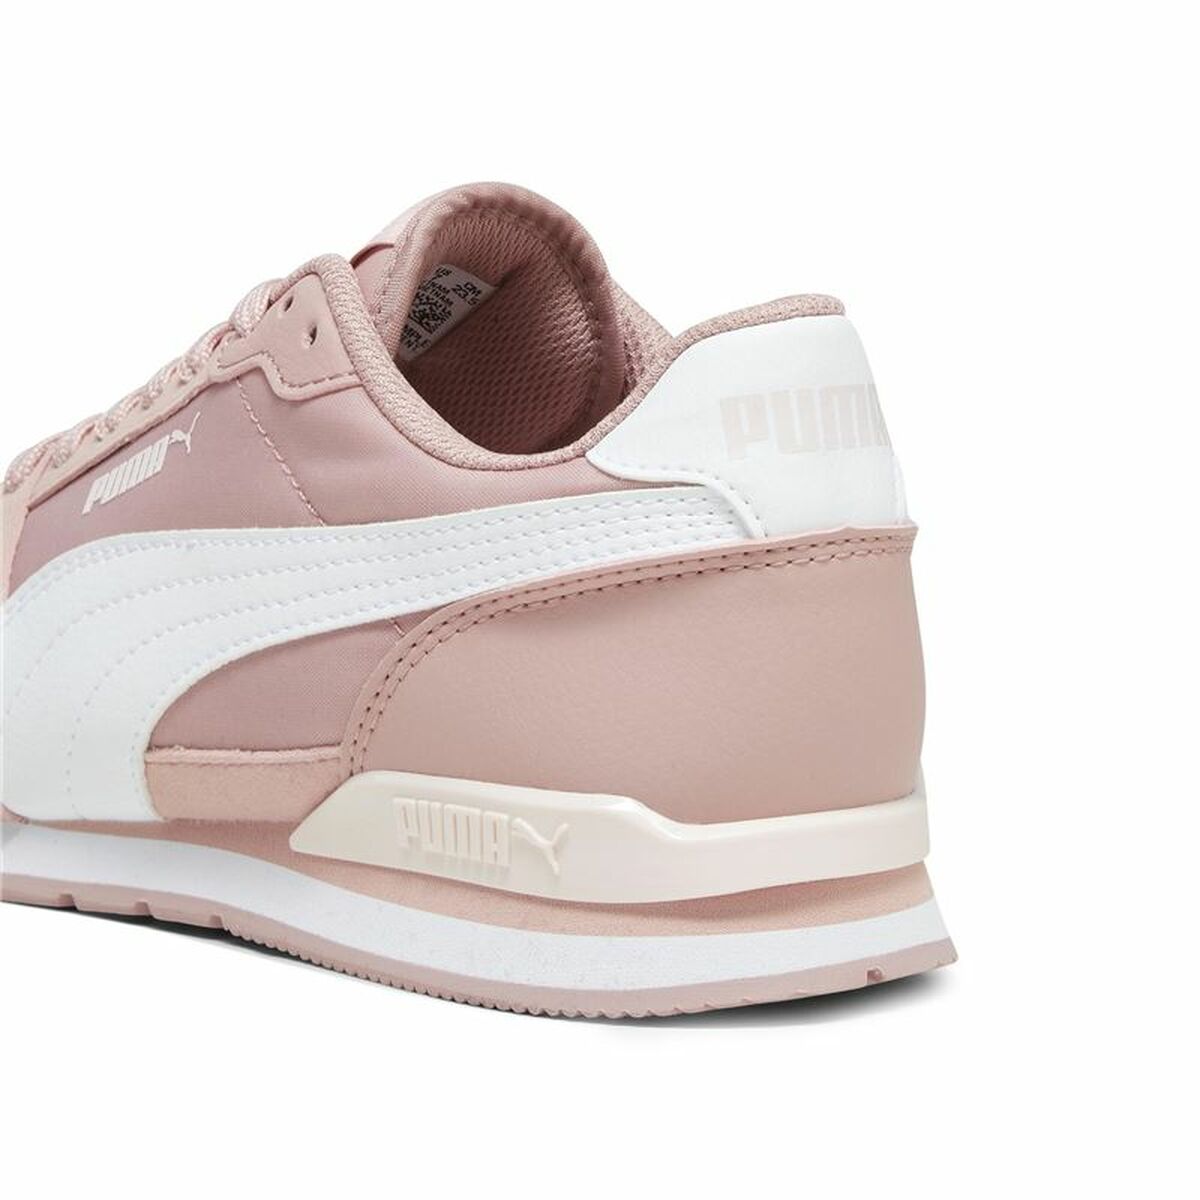 Women's casual trainers Puma St Runner V3 Nl Pink